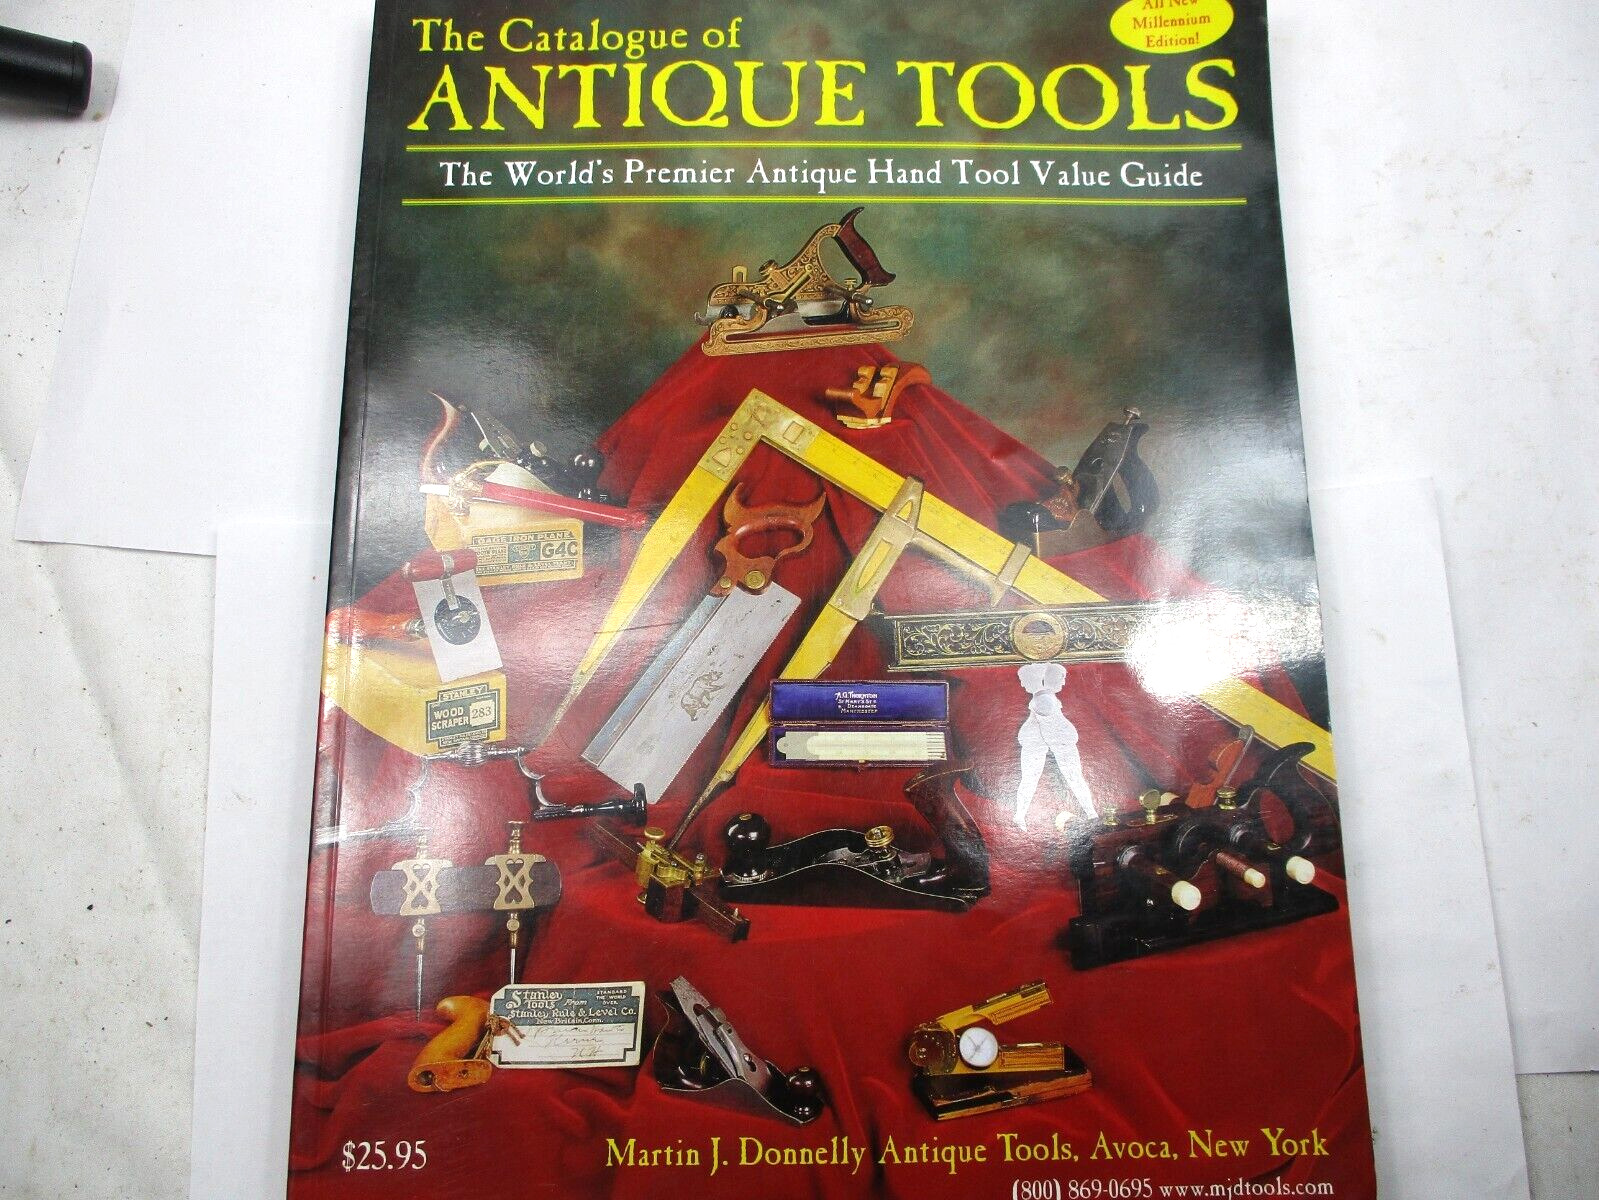 THE CATALOGUE OF ANTIQUE TOOLS BY MARTIN J. DONNELLY - HAND TOOL VALUE GUIDE